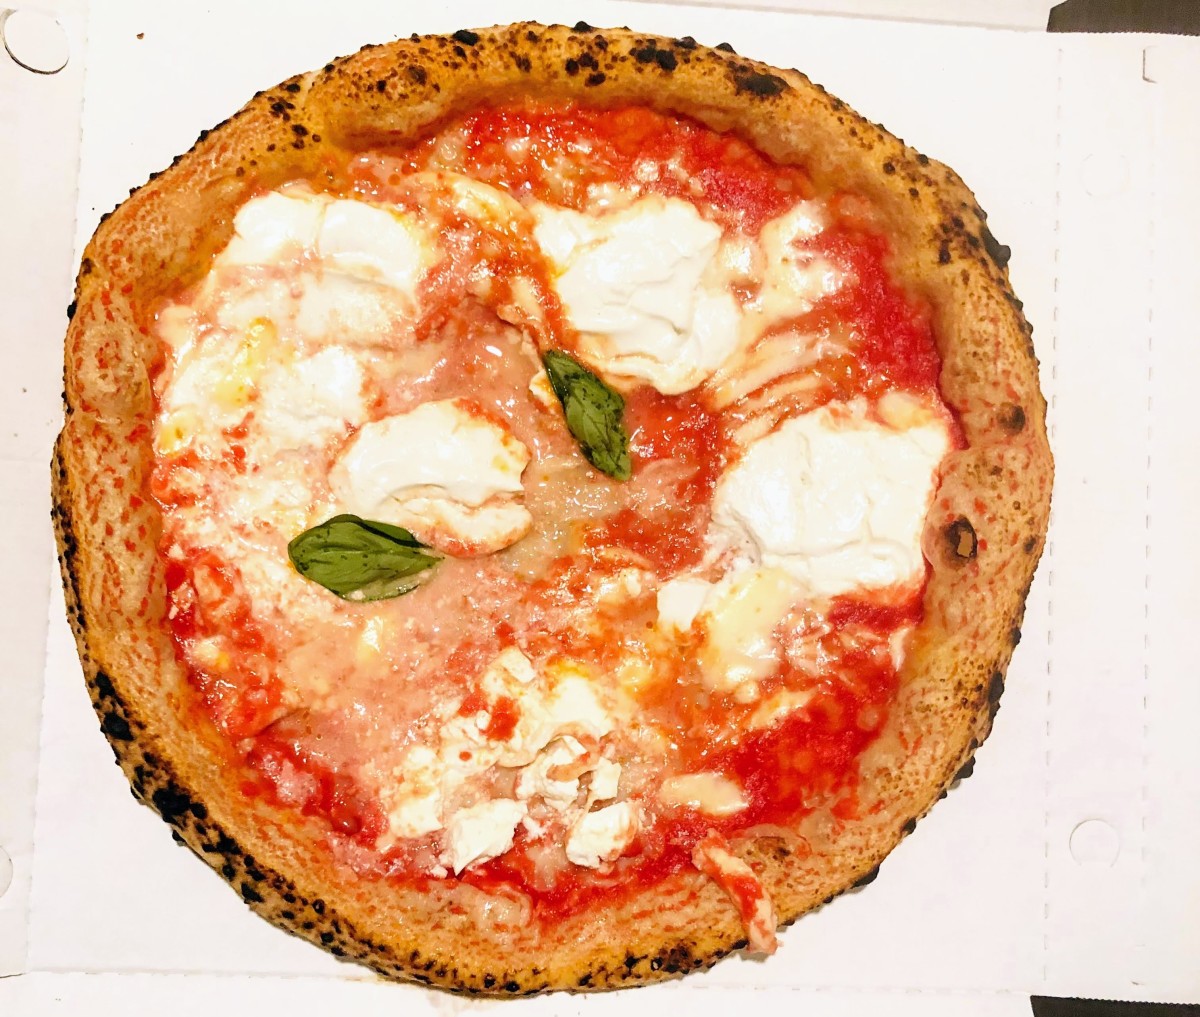 A wood-oven baked Italian-style pizza, topped with tomato sauce, mozzarella cheese, and basil.